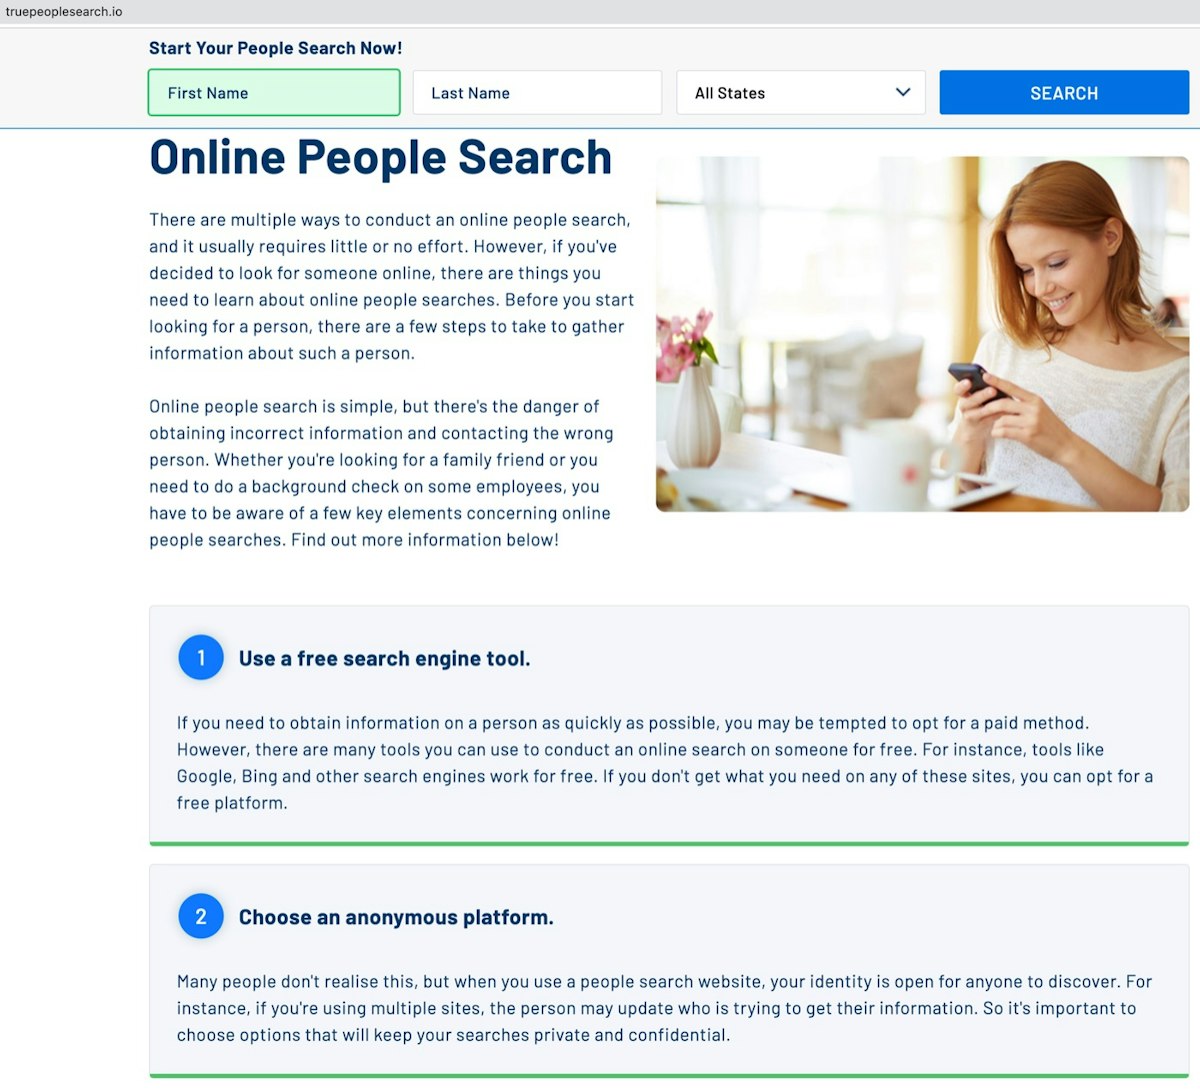 featured image - TruePeopleSearch.io: A Guide
to the Benefits and Use Cases of an Advanced People Search Engine